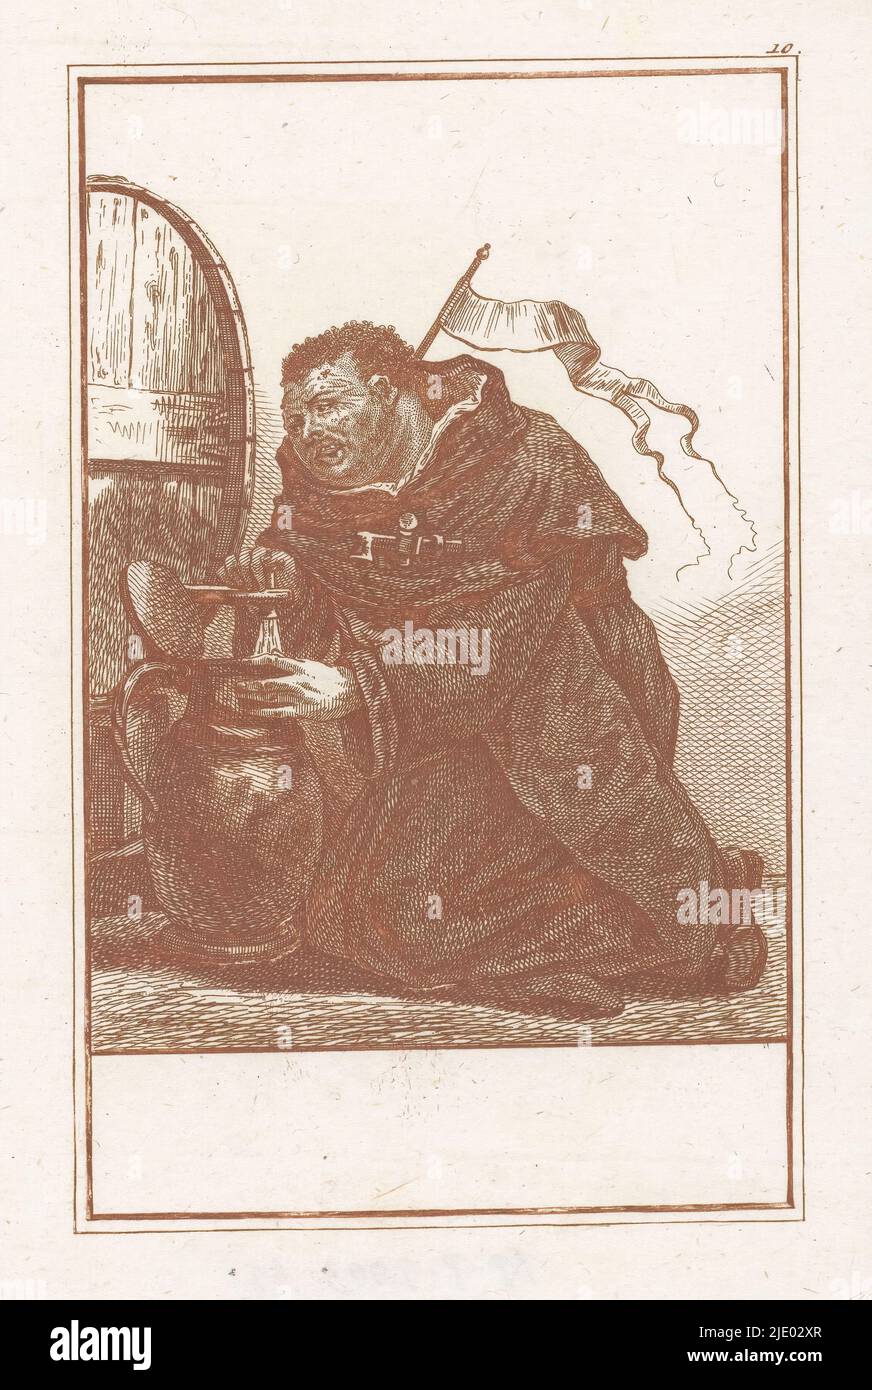 Monk draws beer from a barrel, Abuses of the Catholic Clergy (series title), L'Abregé du Faux Clerge Romain (series title), A monk with a pennant on his habit, sitting in front of a large barrel, from which he draws beer in a pitcher. The print is part of a 50-volume series dealing with the abuses of the Catholic clergy., print maker: Jacob Gole, (attributed to), after drawing by: Cornelis Dusart, Amsterdam, 1724, paper, etching, height 225 mm × width 196 mm Stock Photo